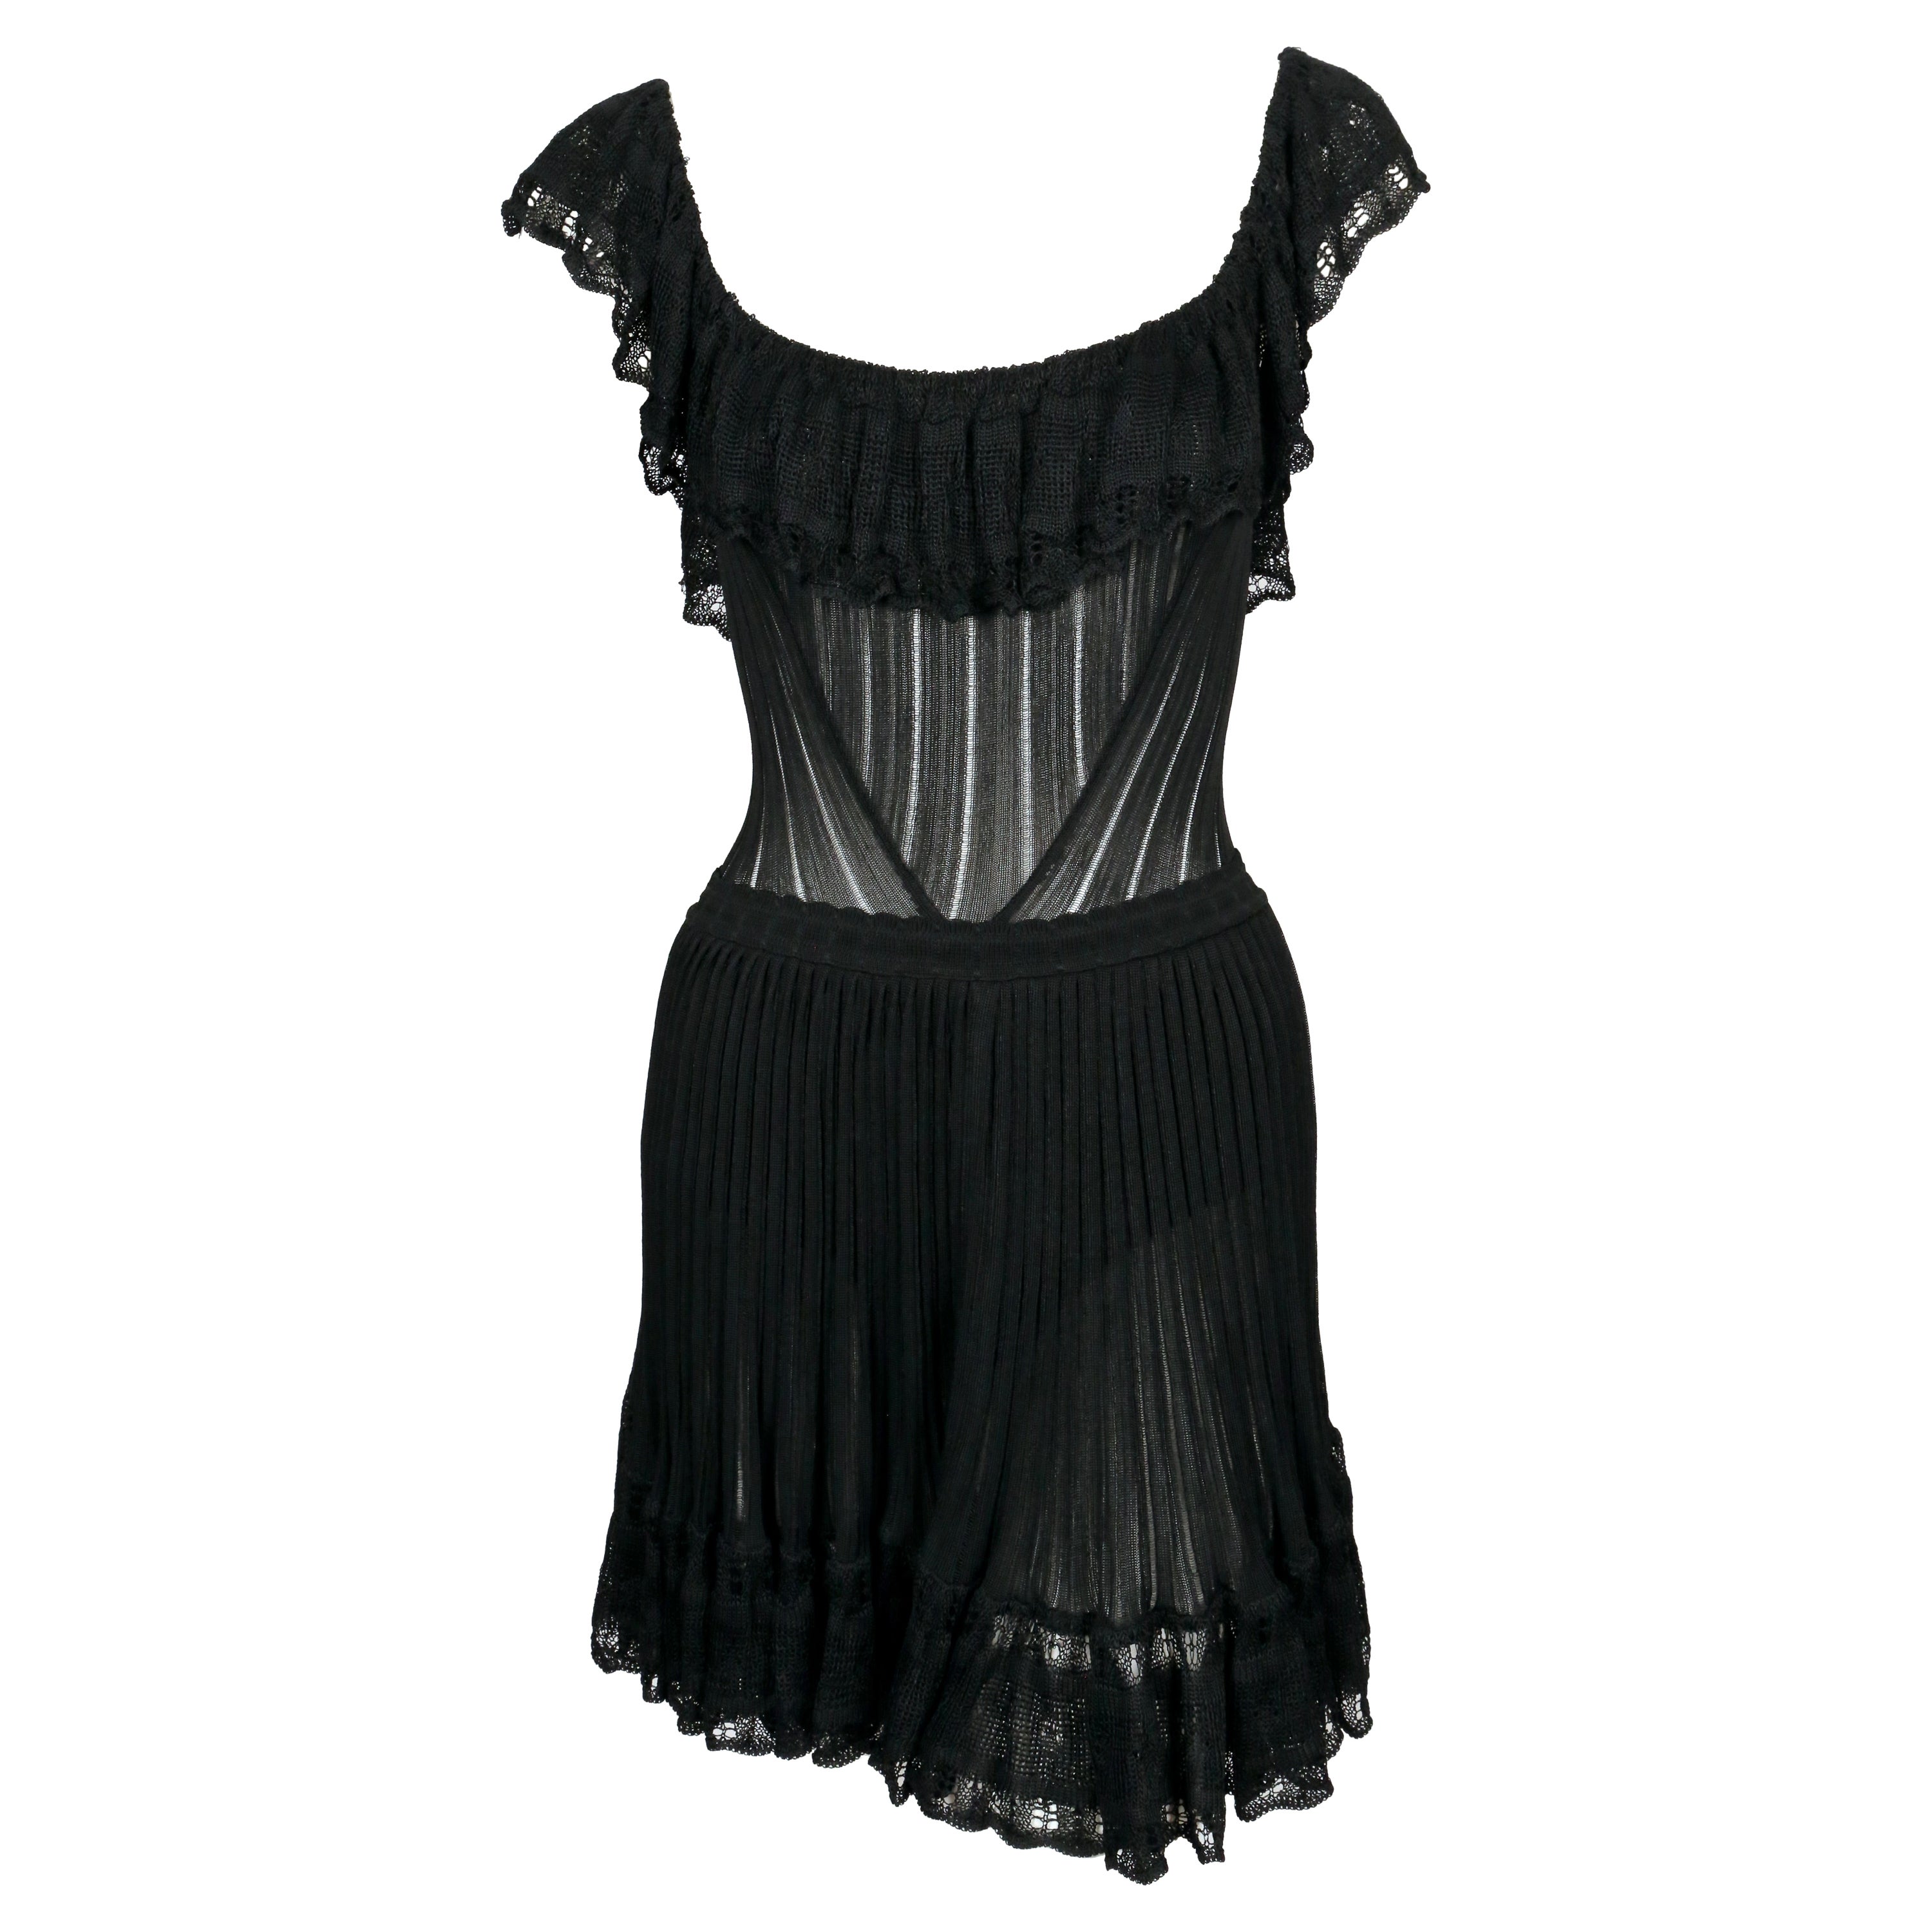  1992 AZZEDINE ALAIA black lace RUNWAY dress with bustle For Sale